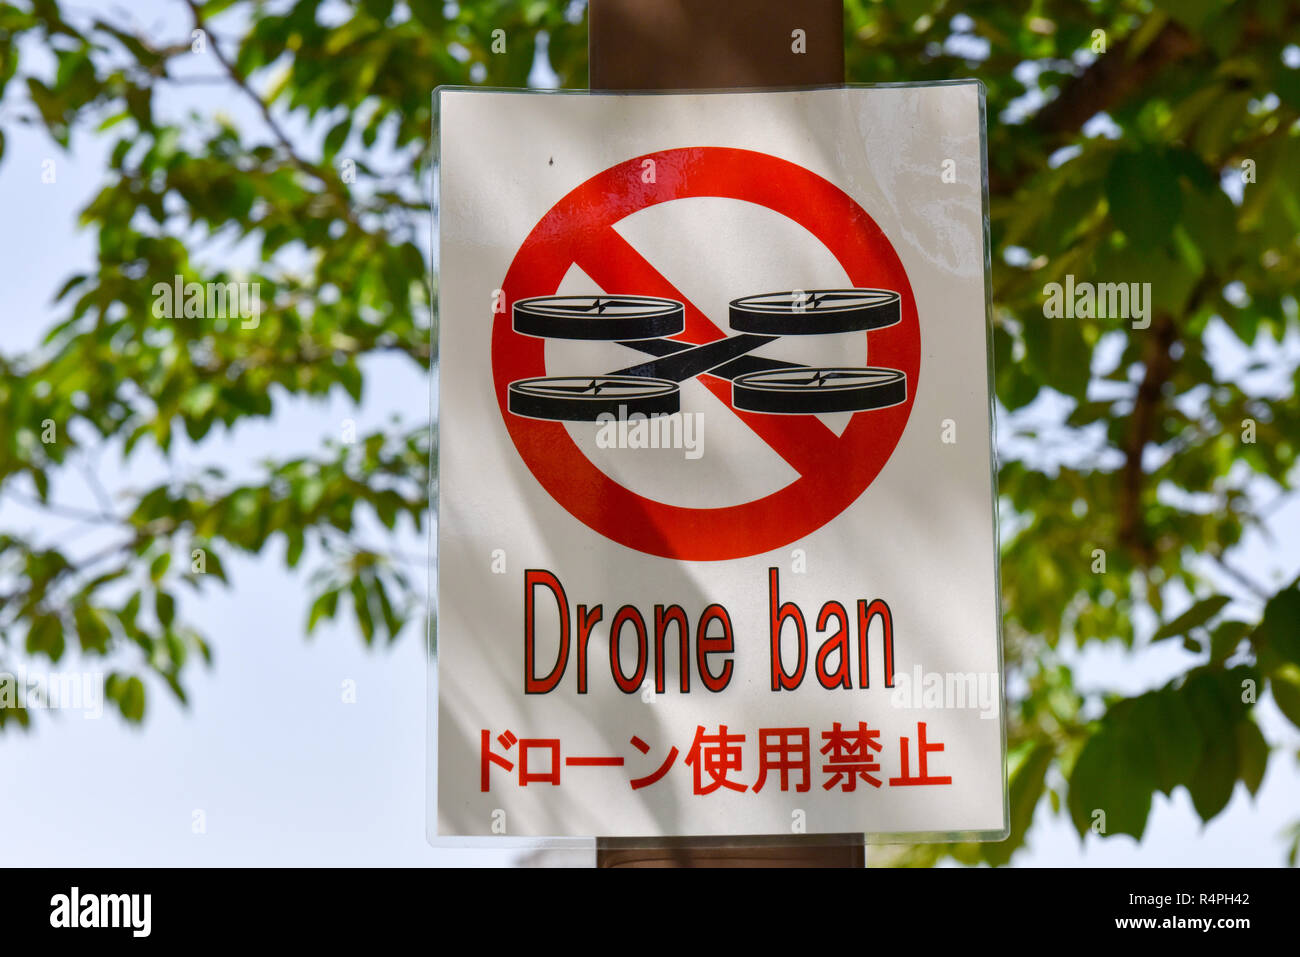 No drones sign, Japan Stock Photo